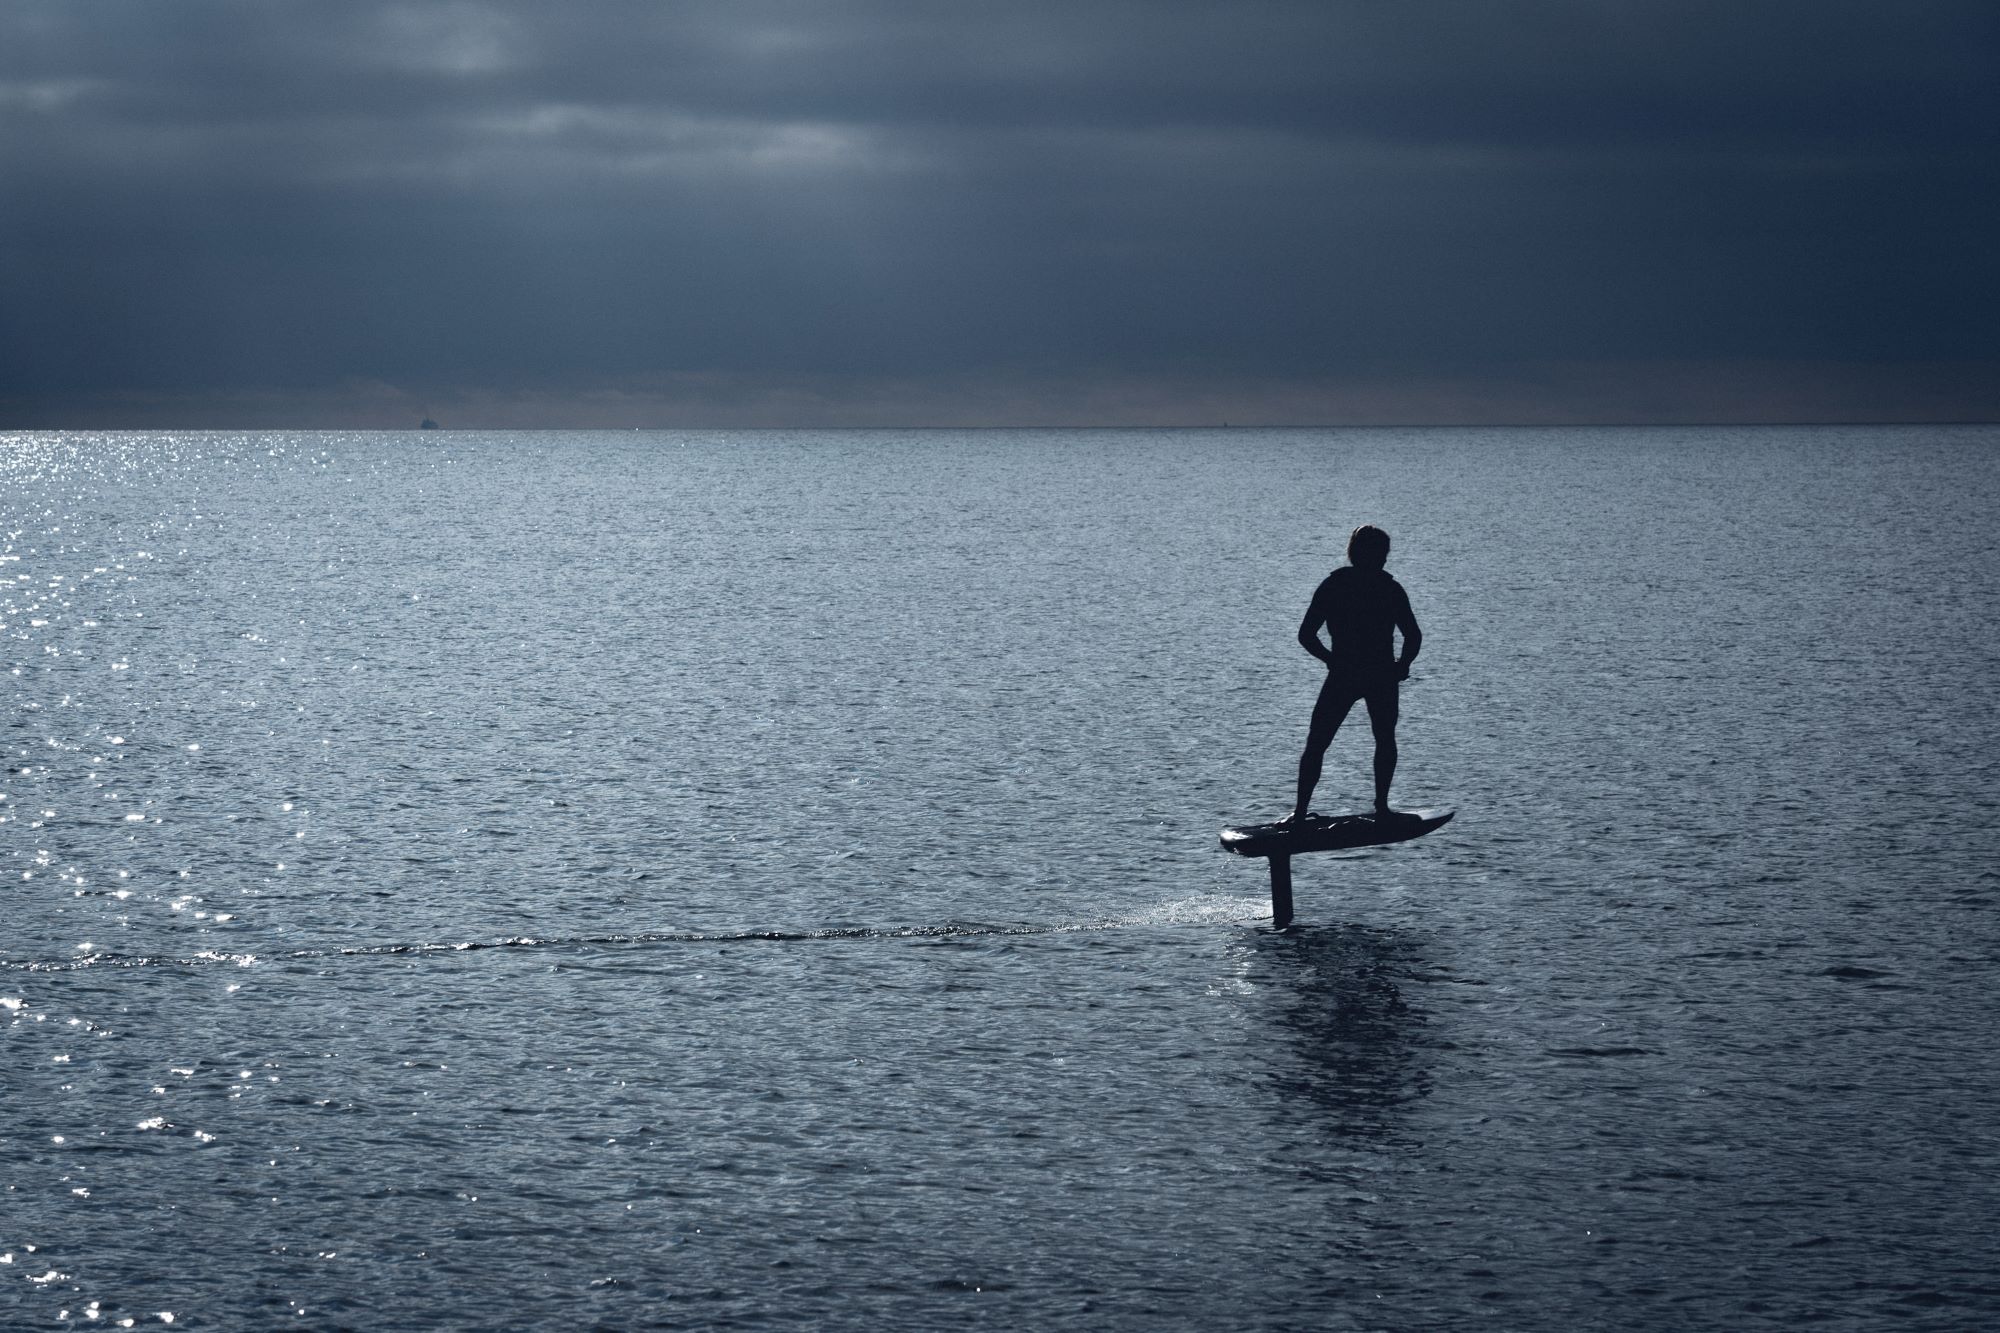 An image of a person eFoling on a Fliteboard.